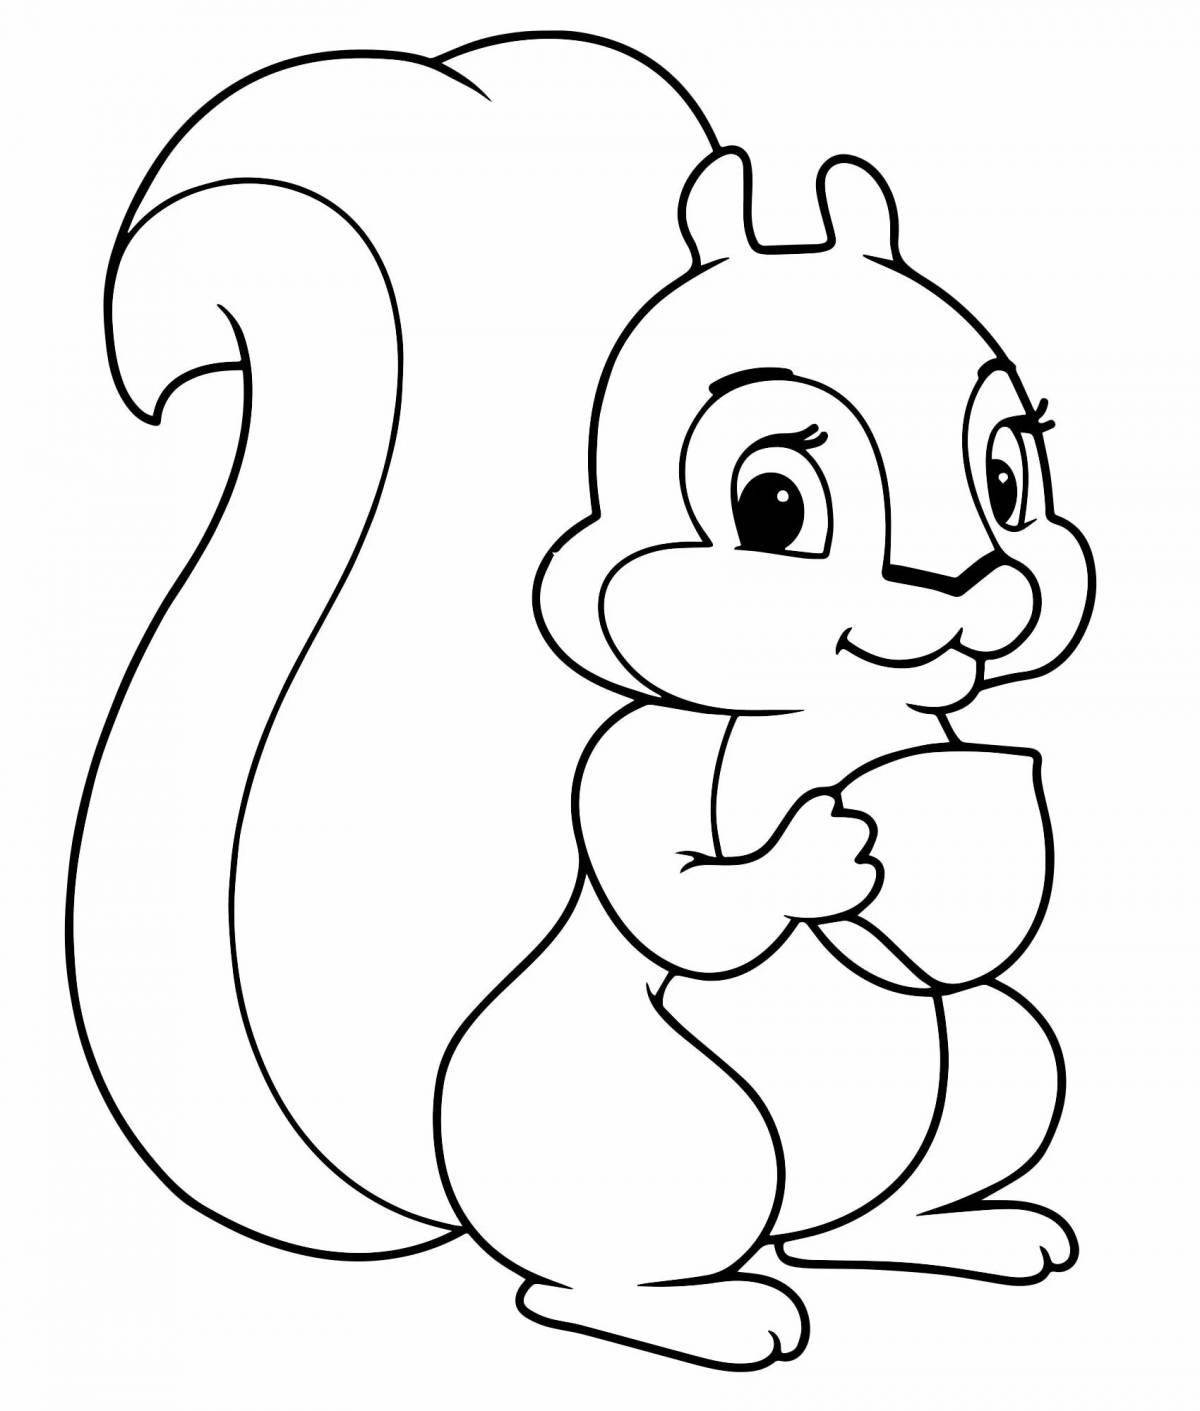 Adorable squirrel drawing for kids